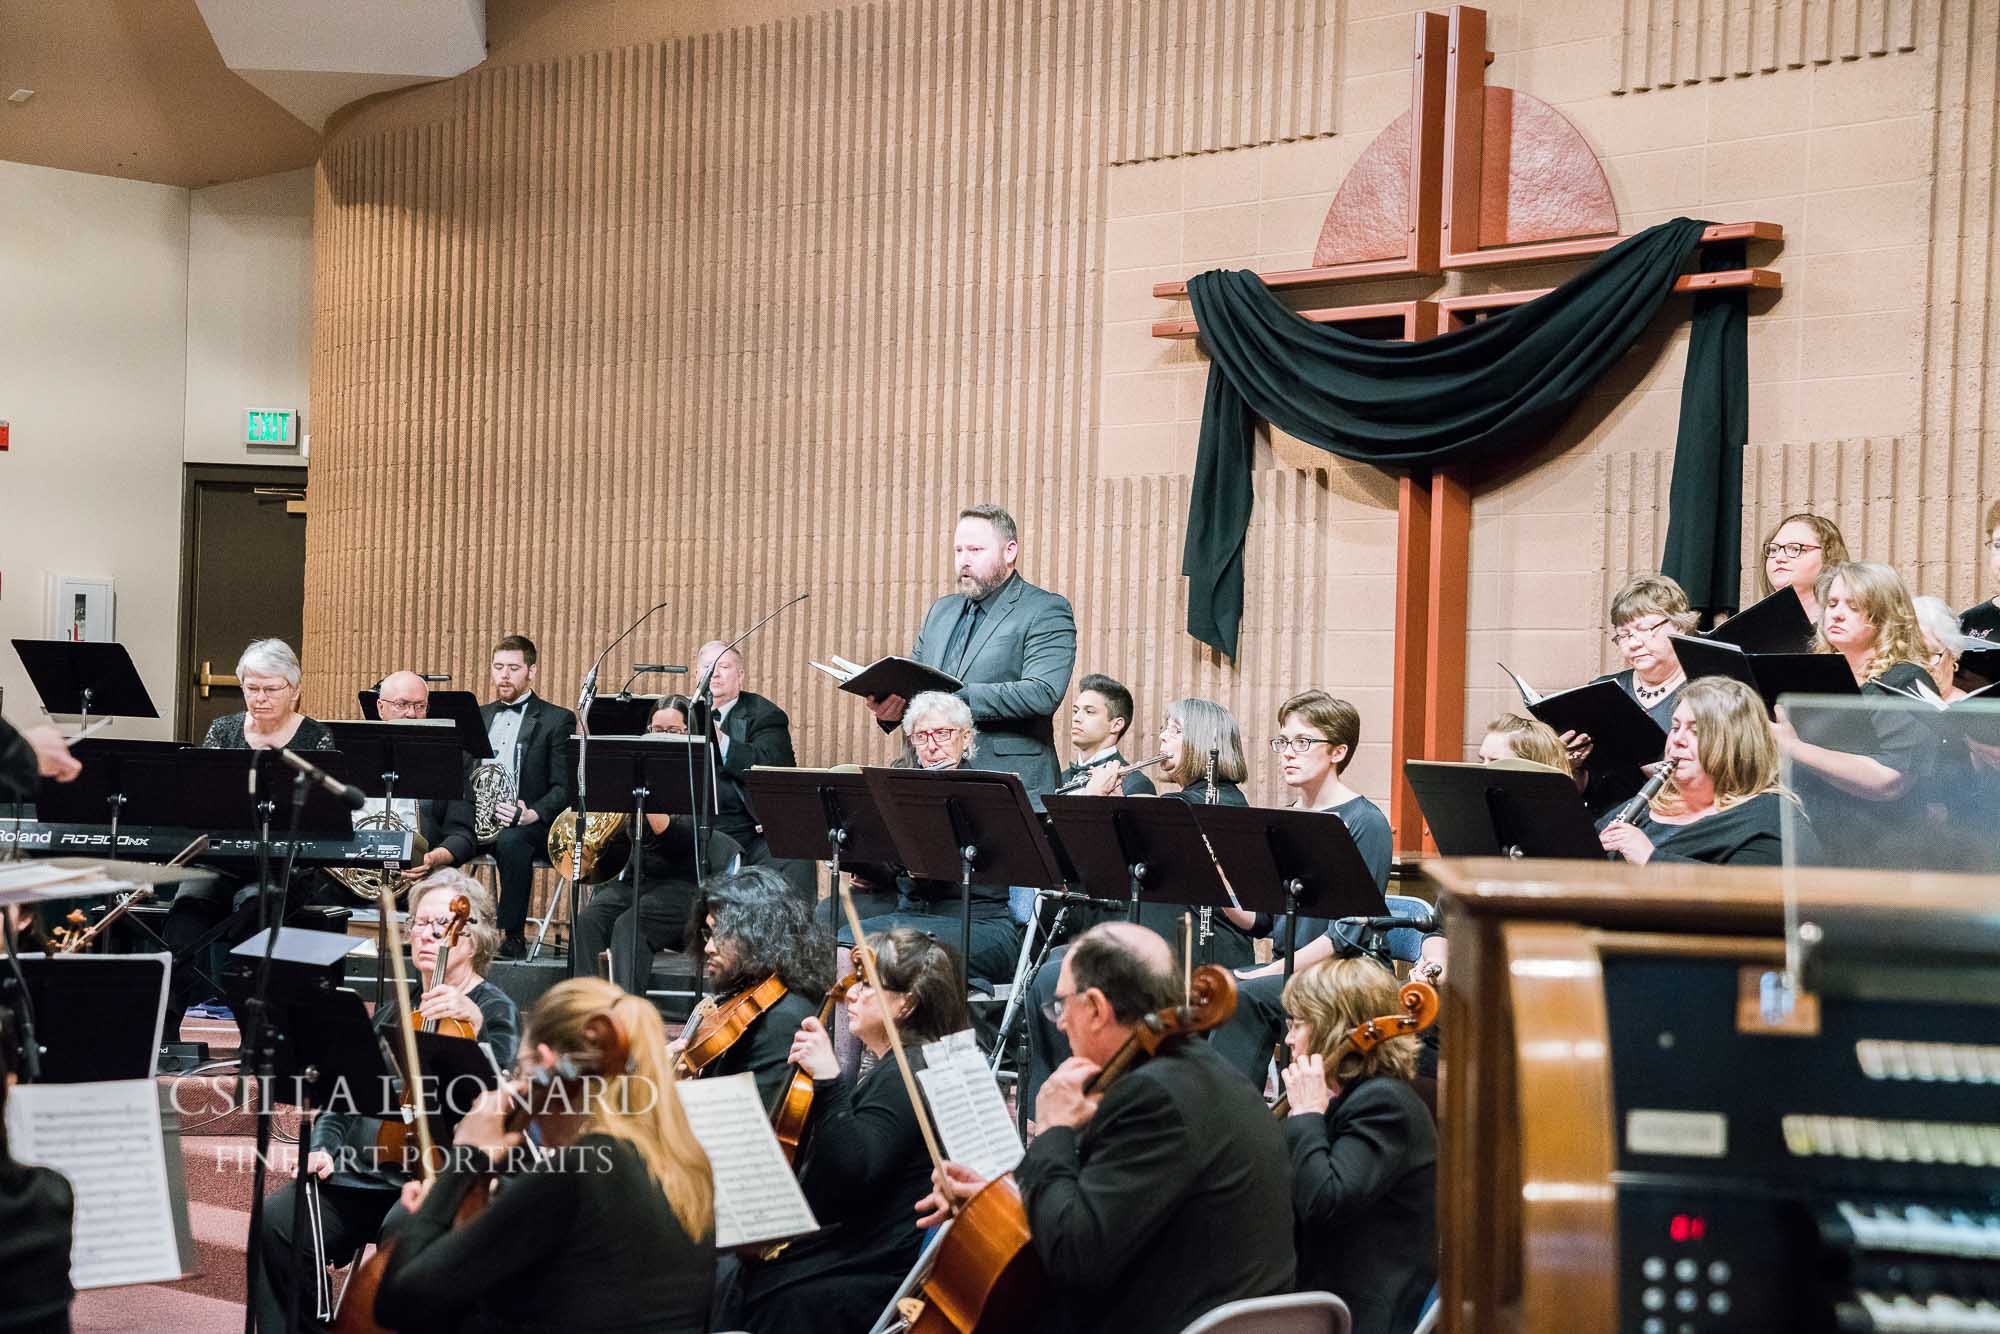 Grand junction photographer shows images of Good Friday concert (6)